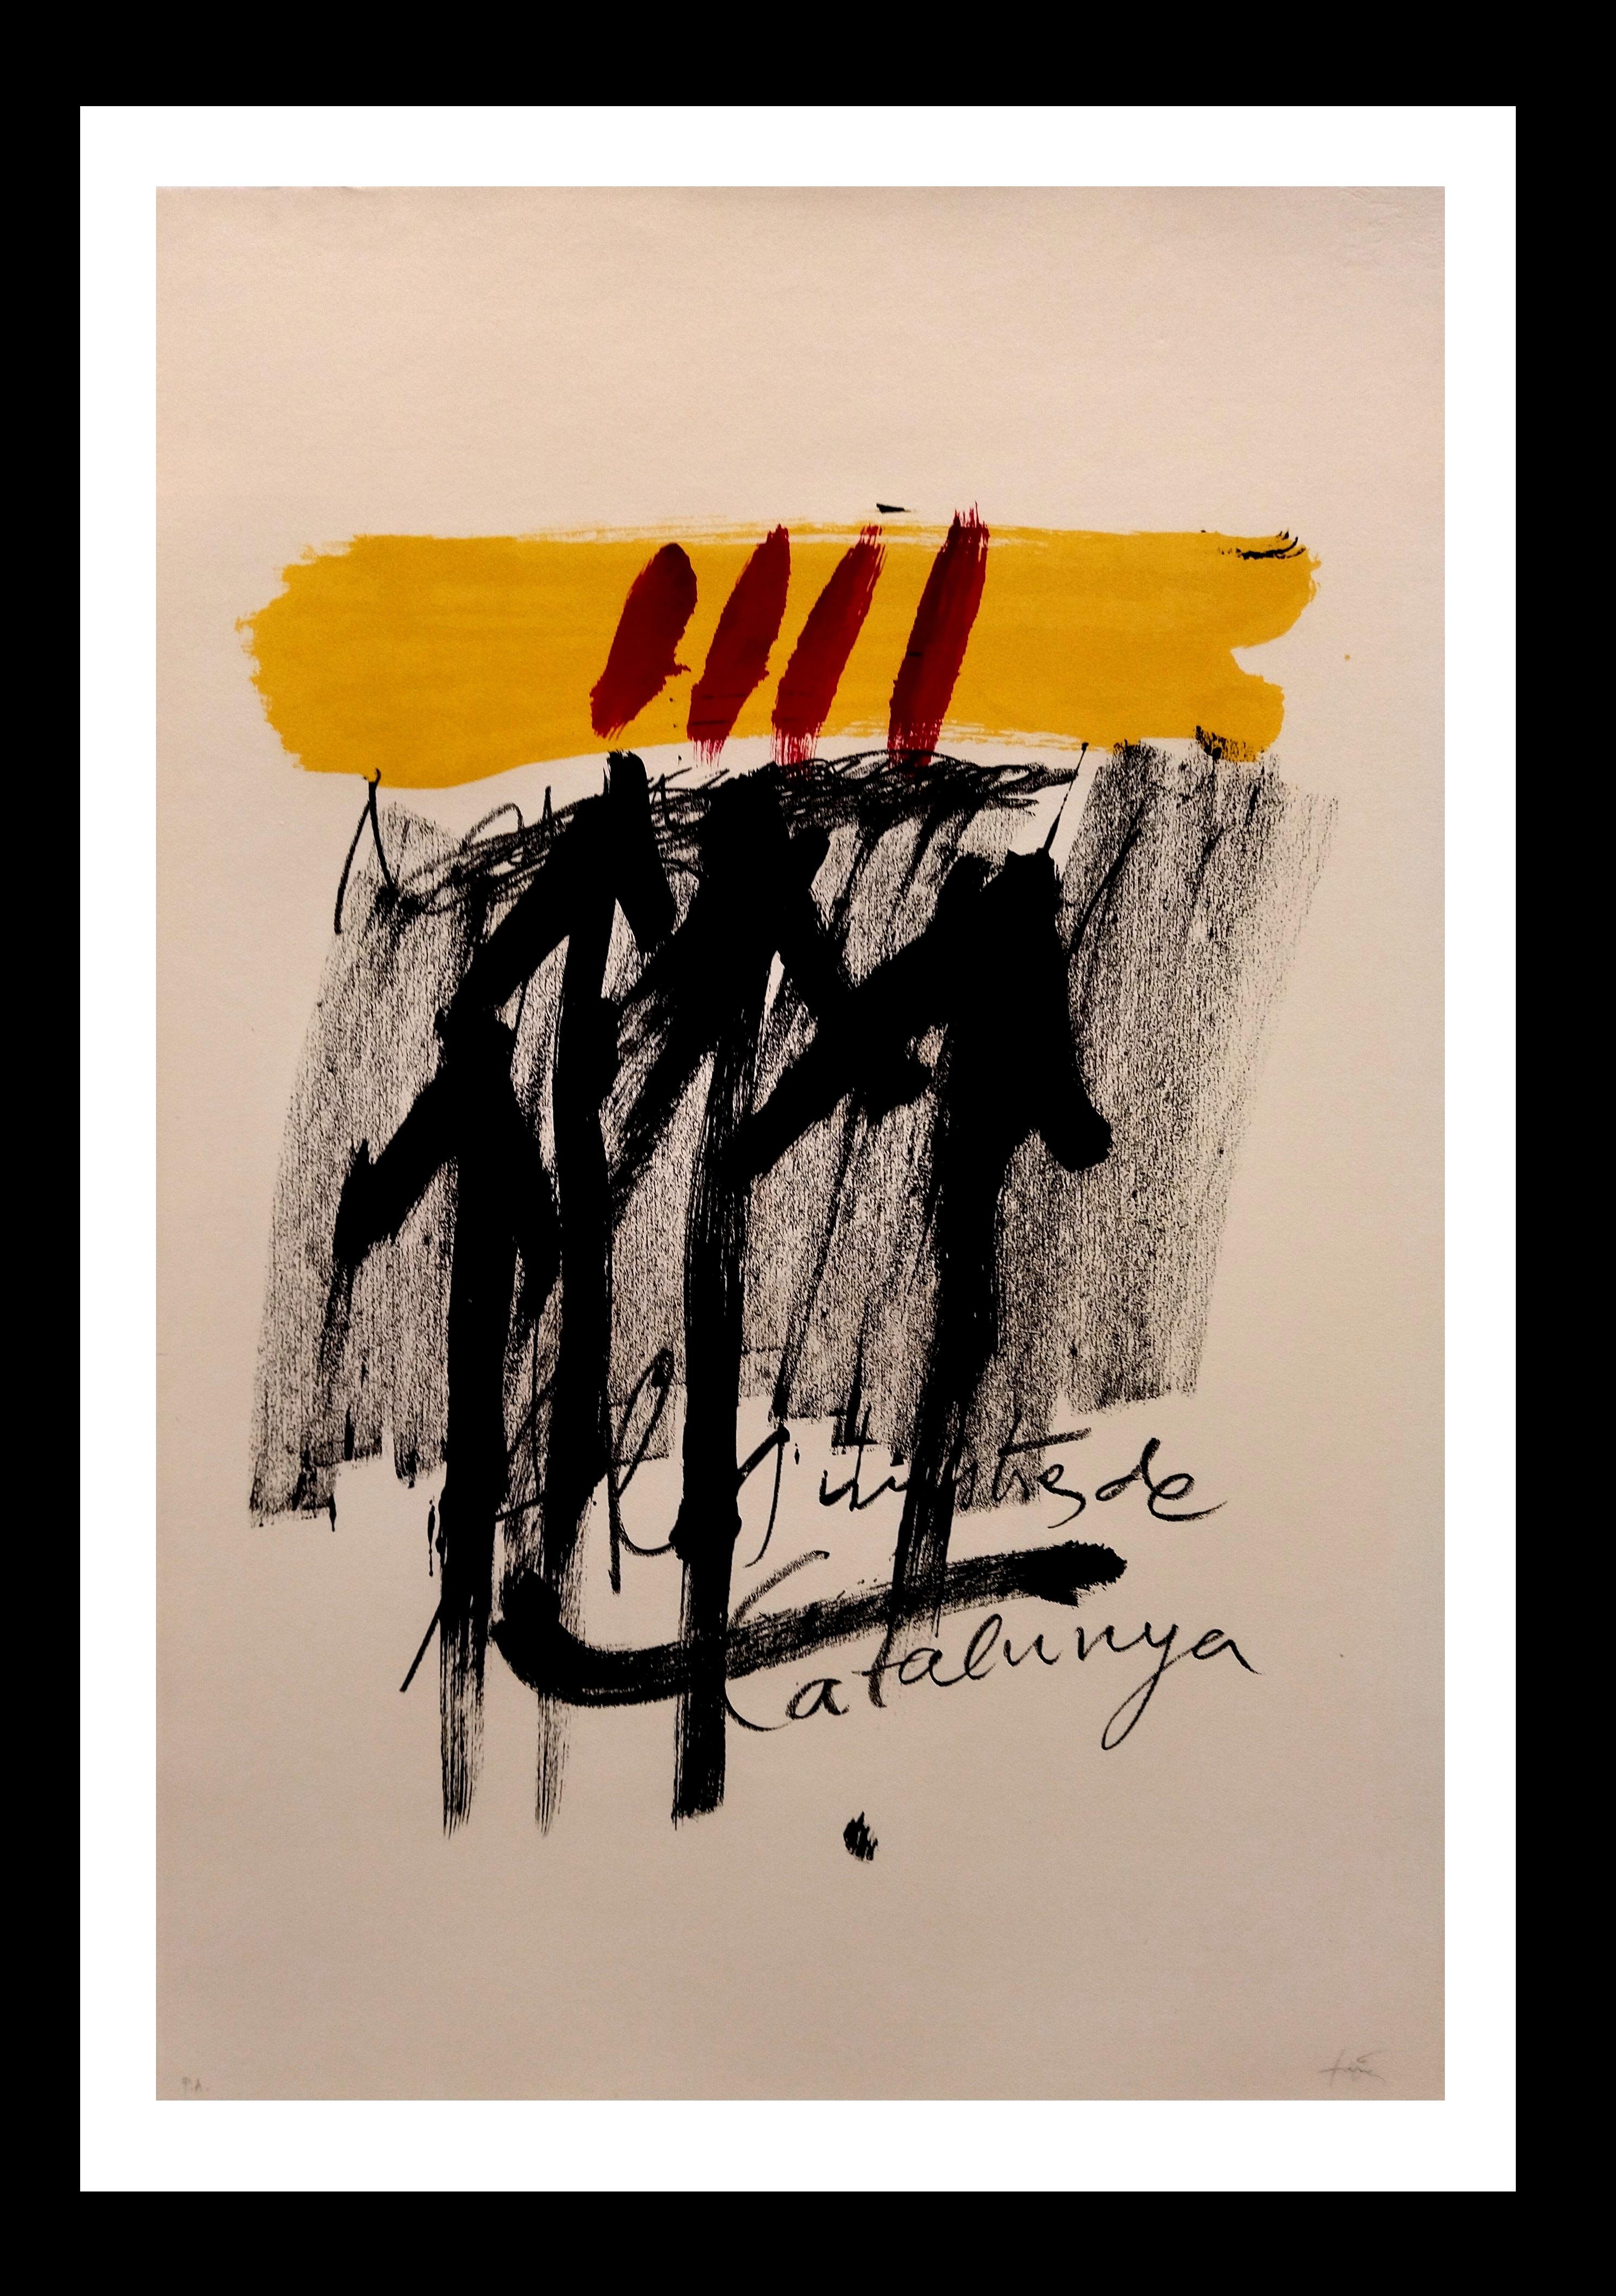 Antoni Tàpies Abstract Print -  Tapies 114 Black  Red  Yellow  Vertical  original lithograph painting